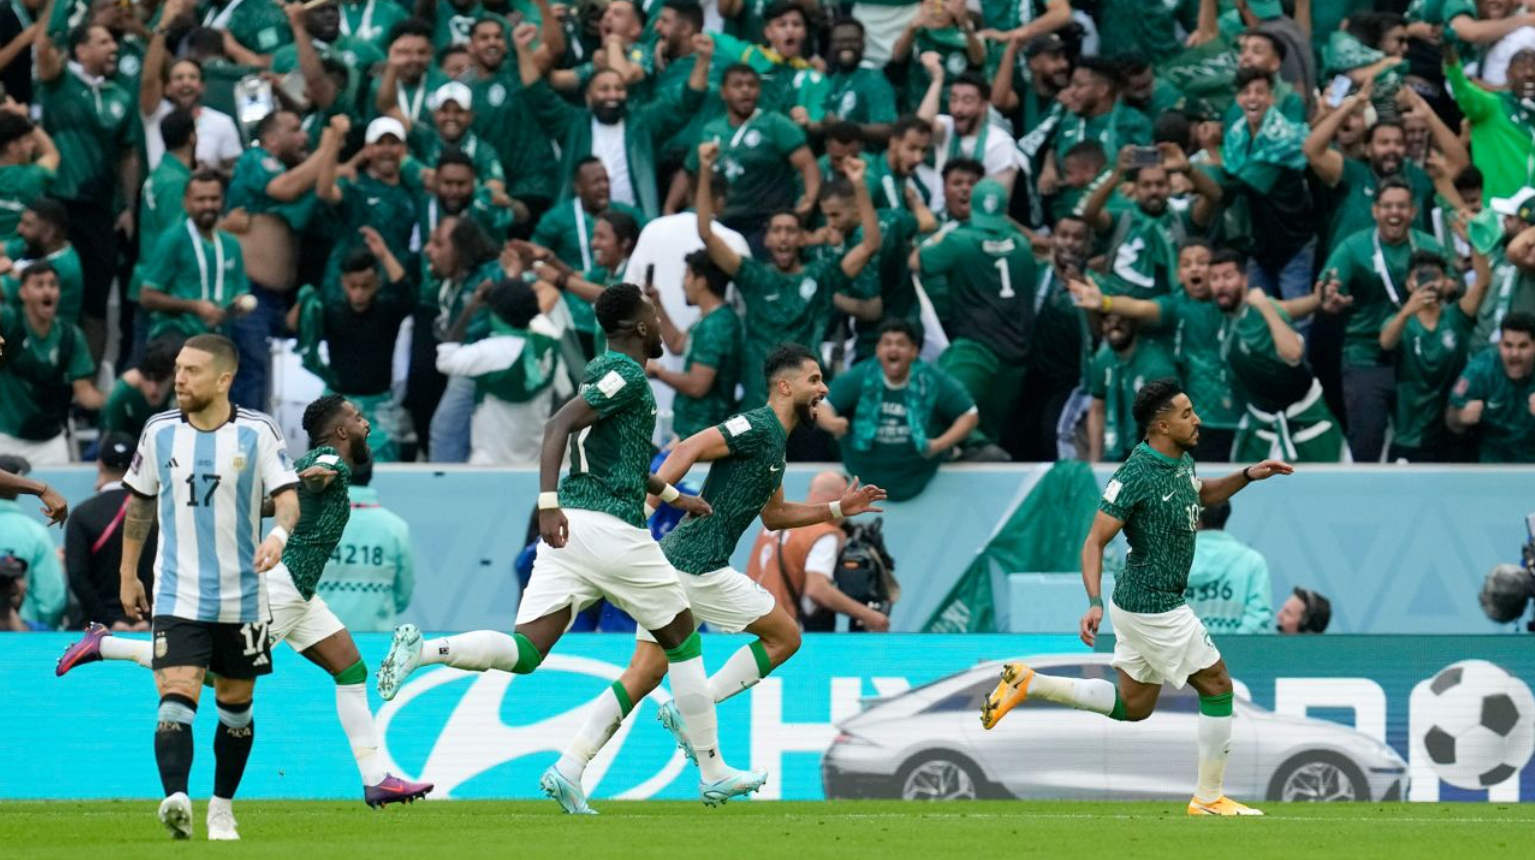 Saudi Arabia stunned the world with a come-from-behind victory over Argentina. So here are our Tops and Flops from the Day 3 of the World Cup 2022